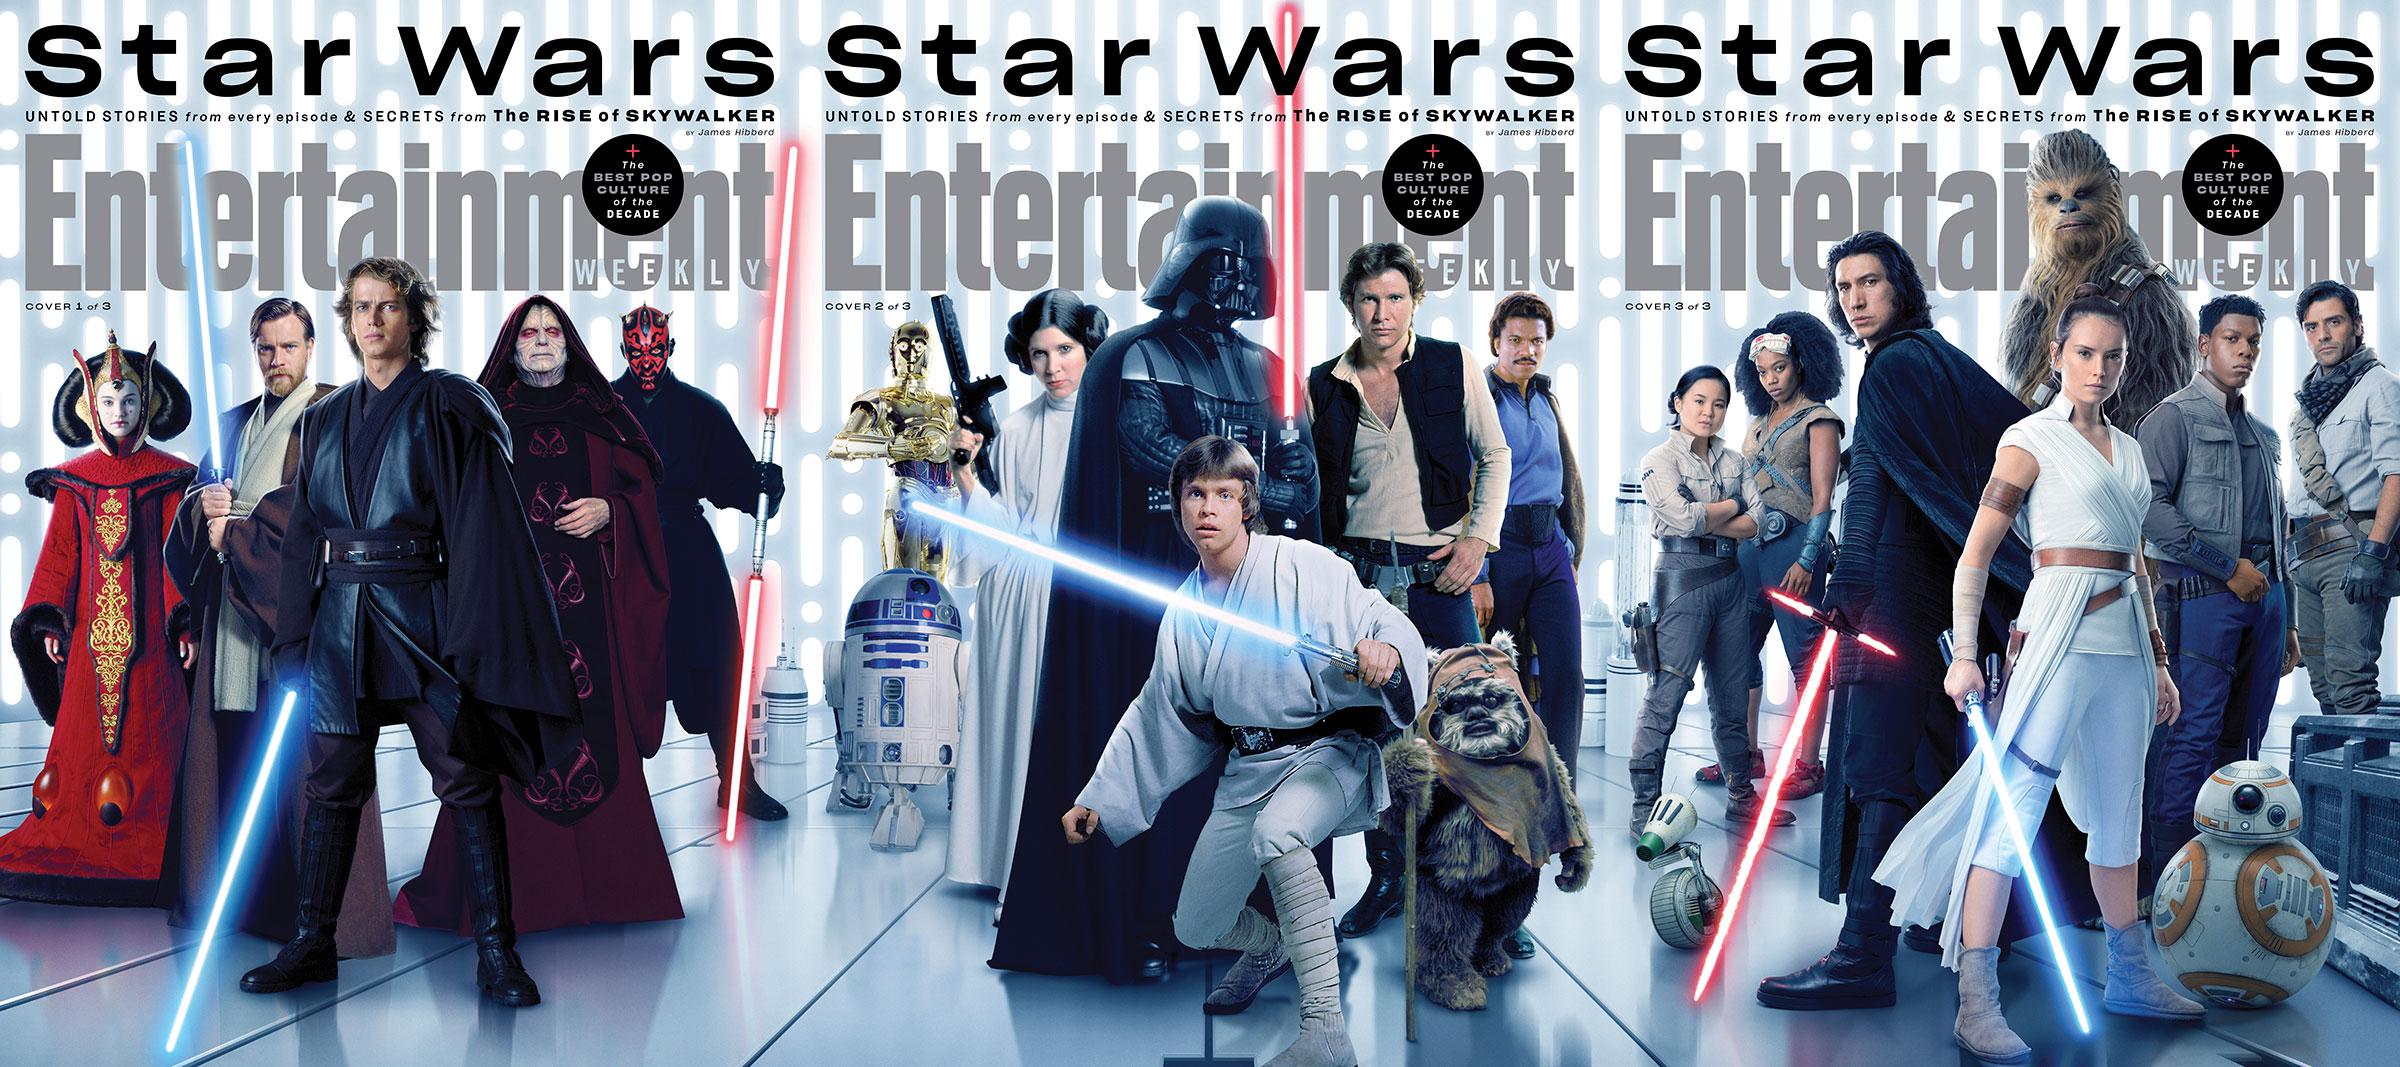 Star Wars Collectible Covers From Entertainment Weekly